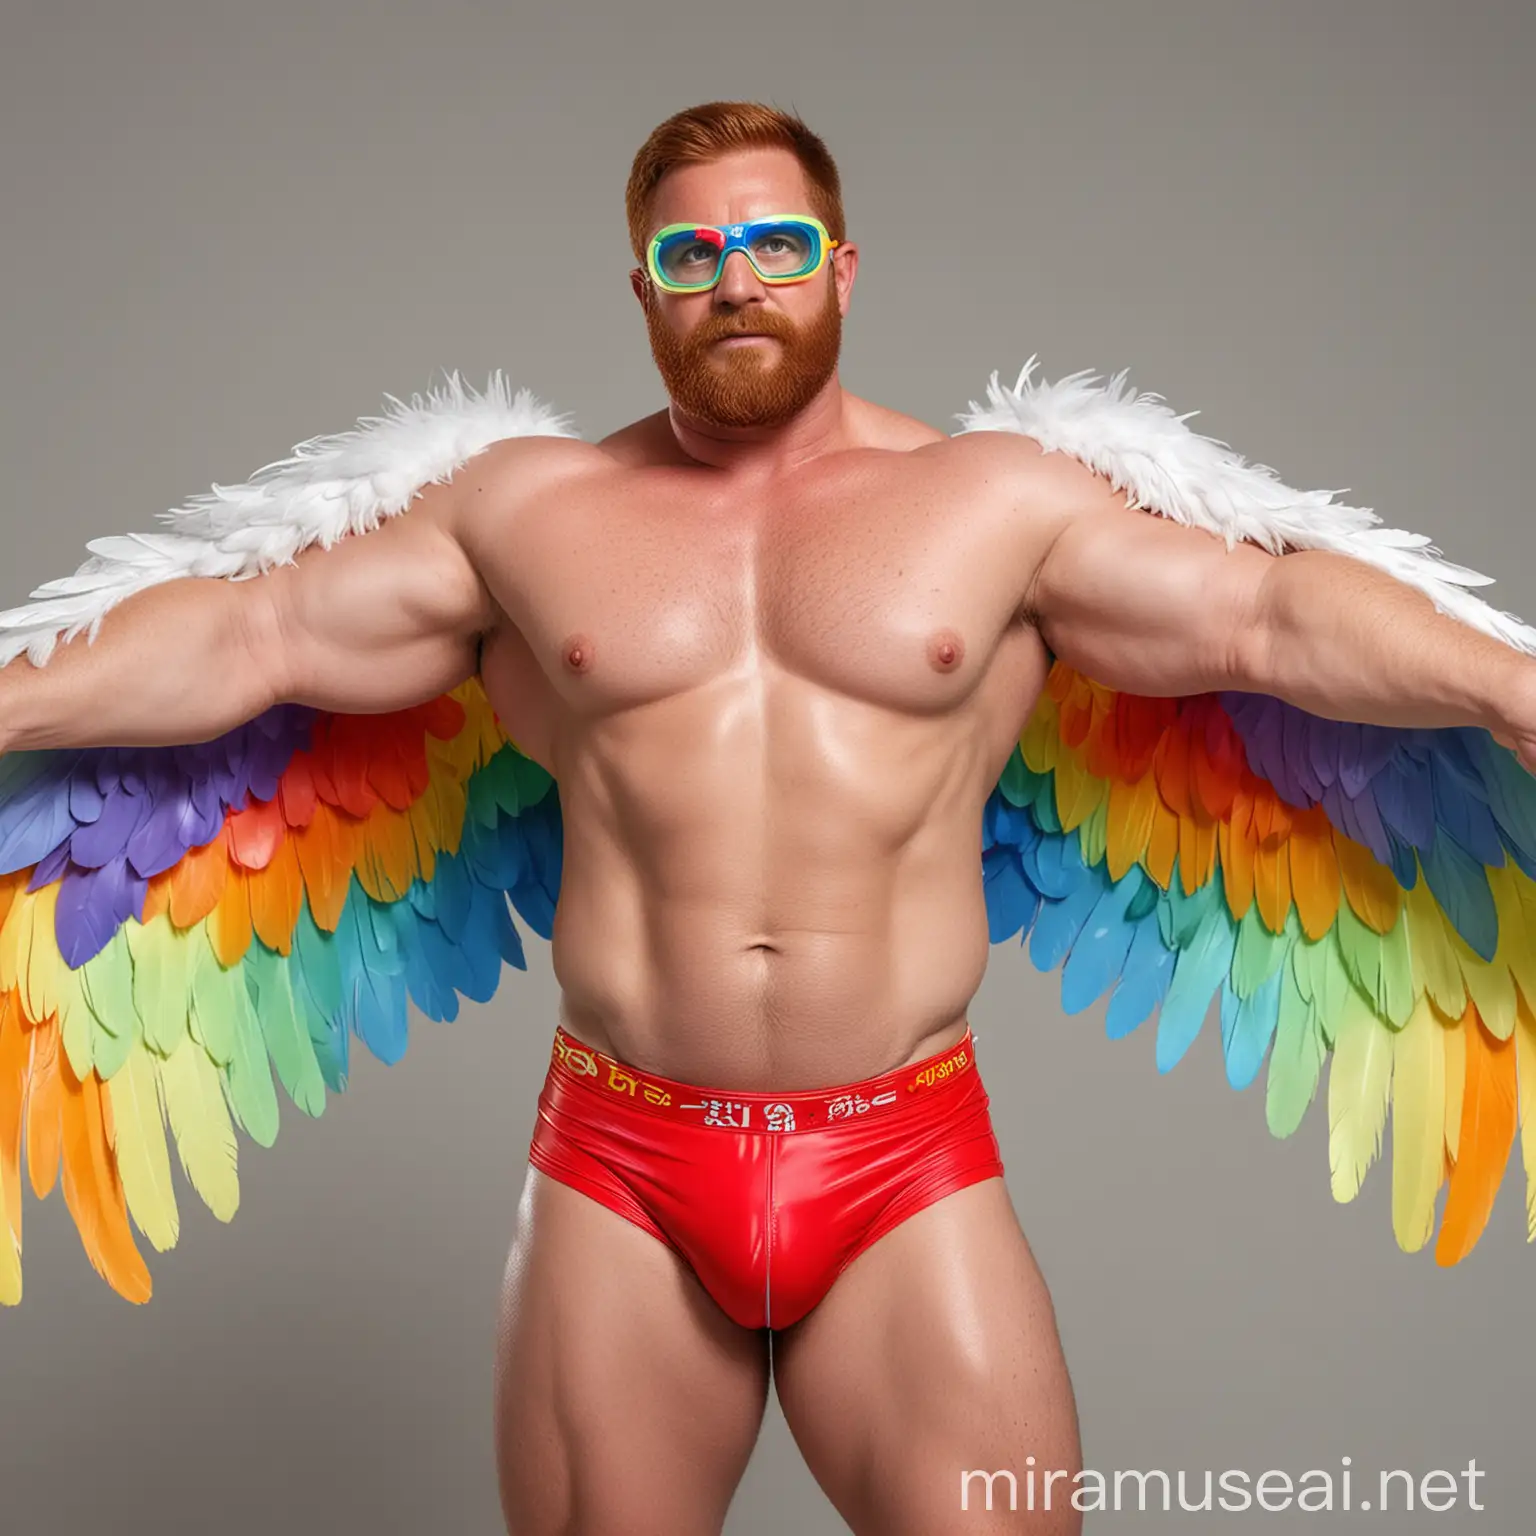 Beefy Red Head Bodybuilder Flexing with Rainbow Eagle Wings Jacket